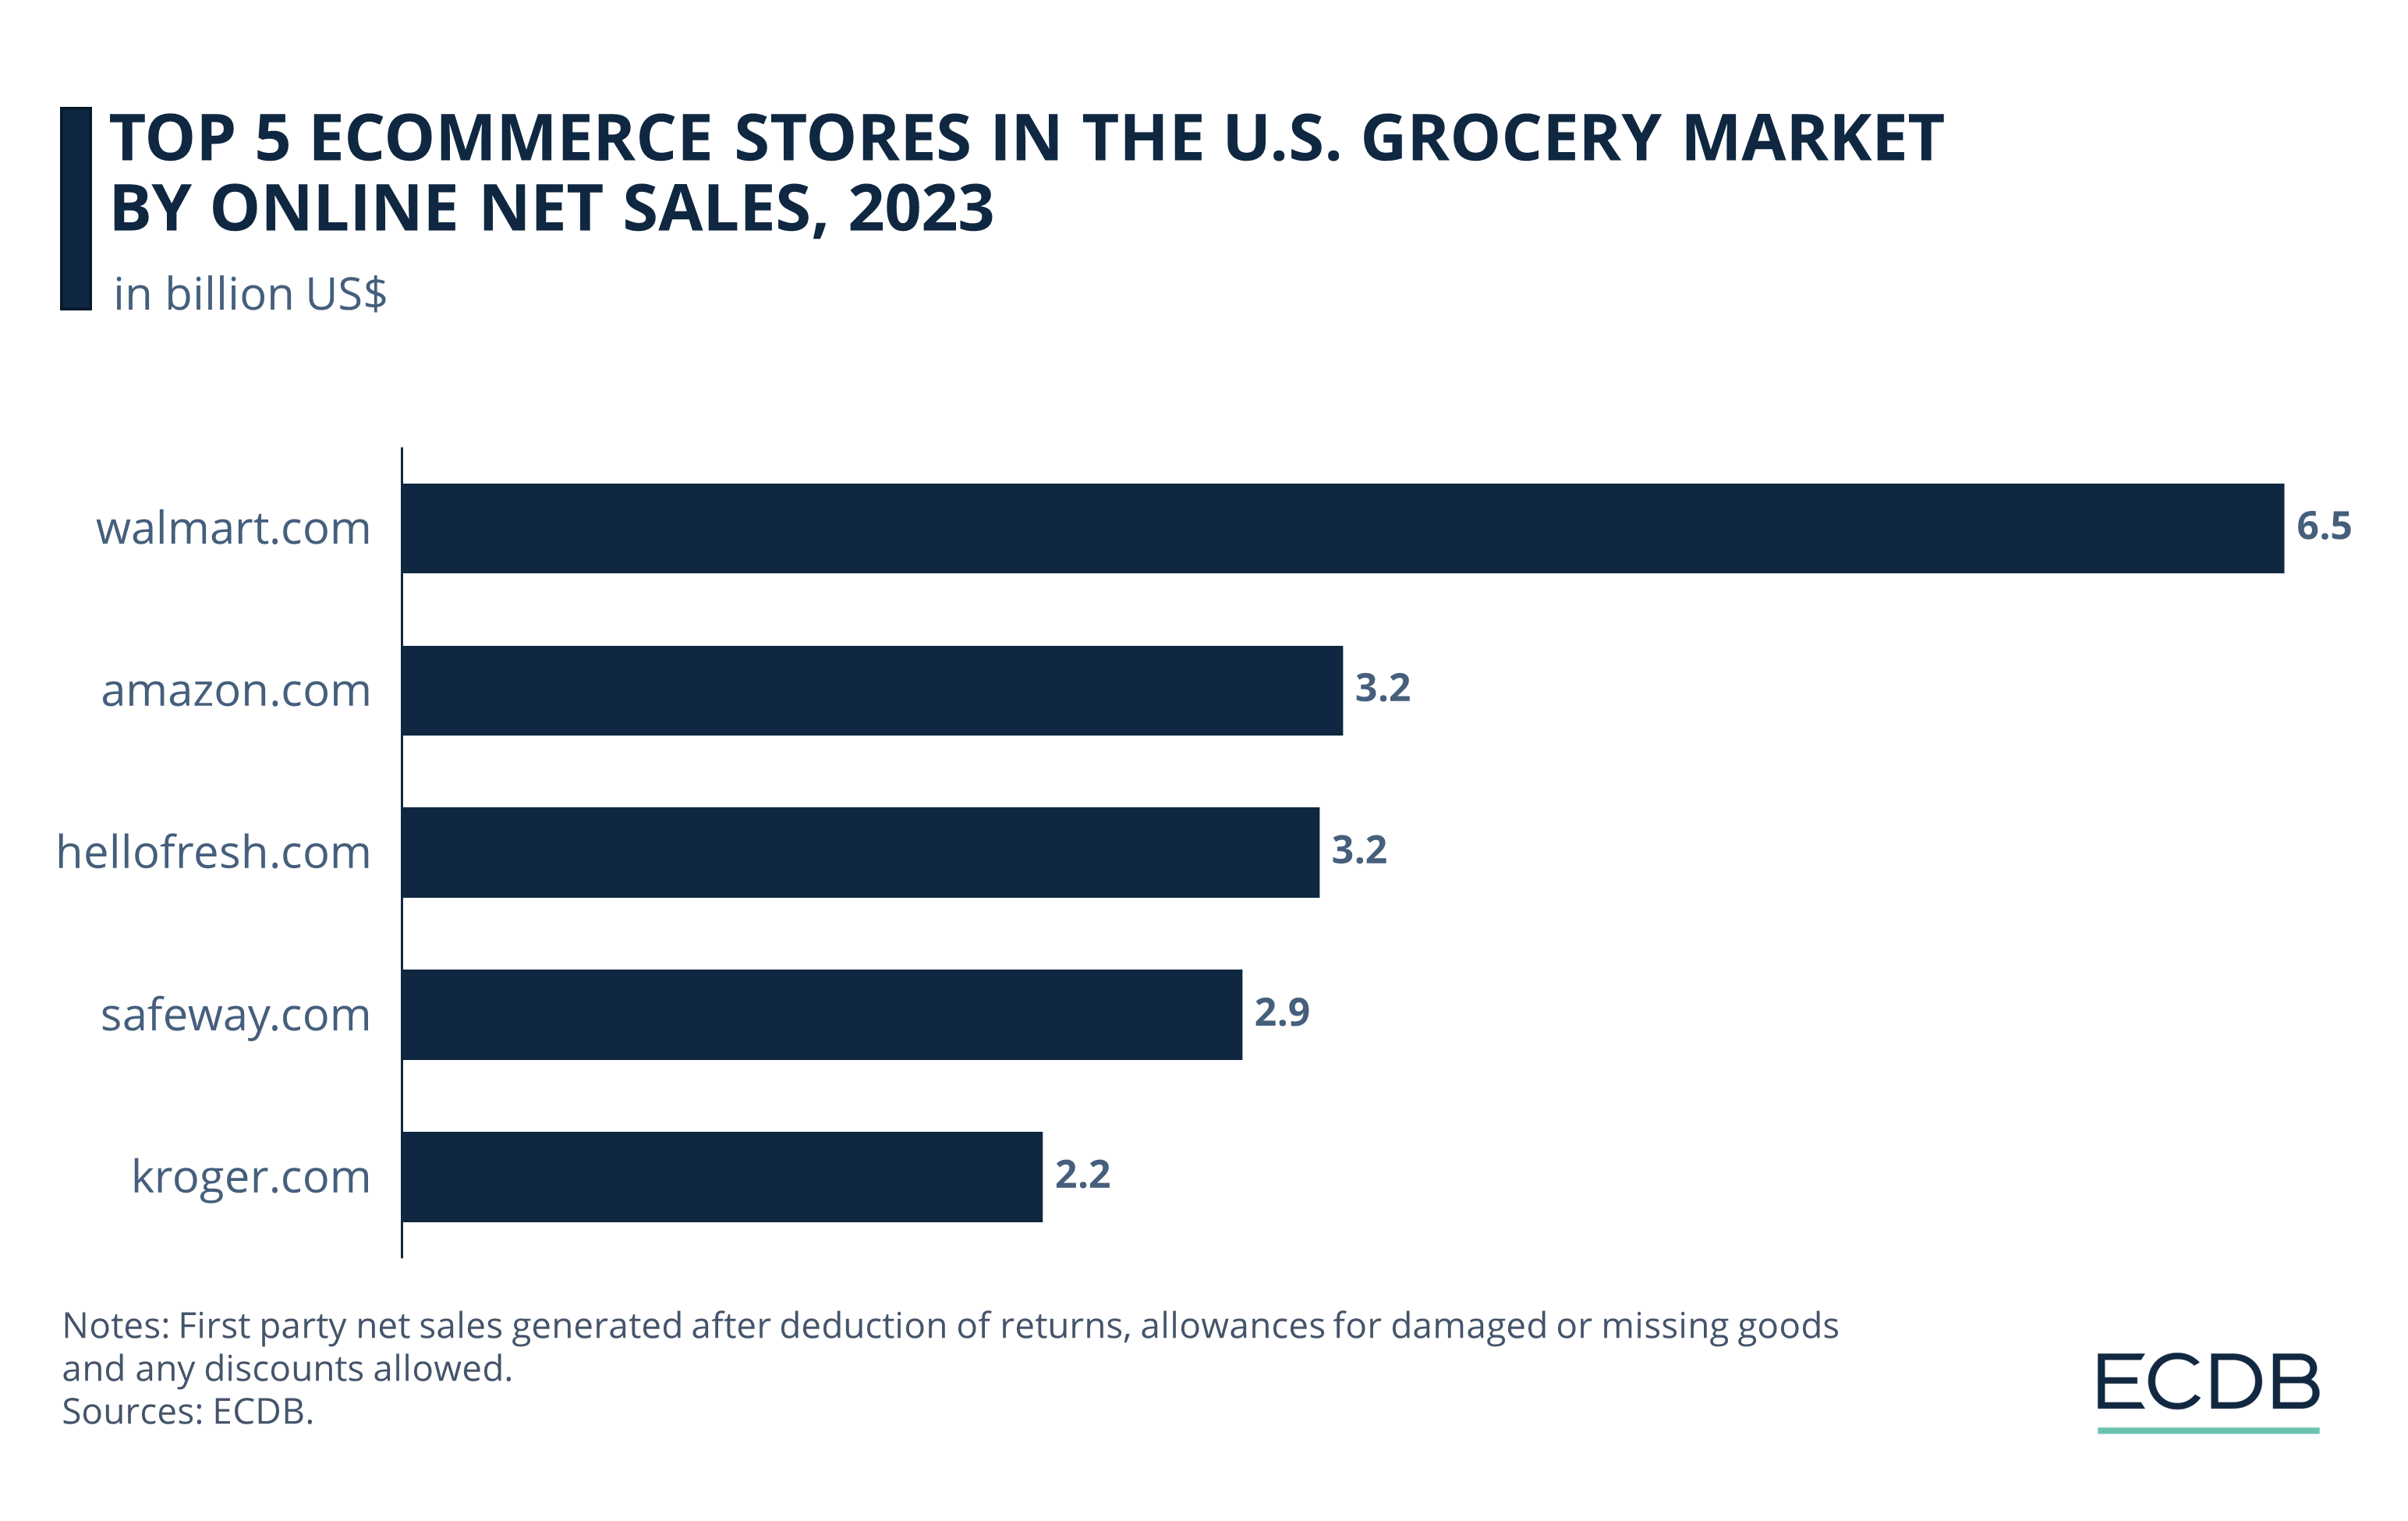 Top 5 eCommerce Stores in the U.S. Grocery Market by Online Net Sales, 2023